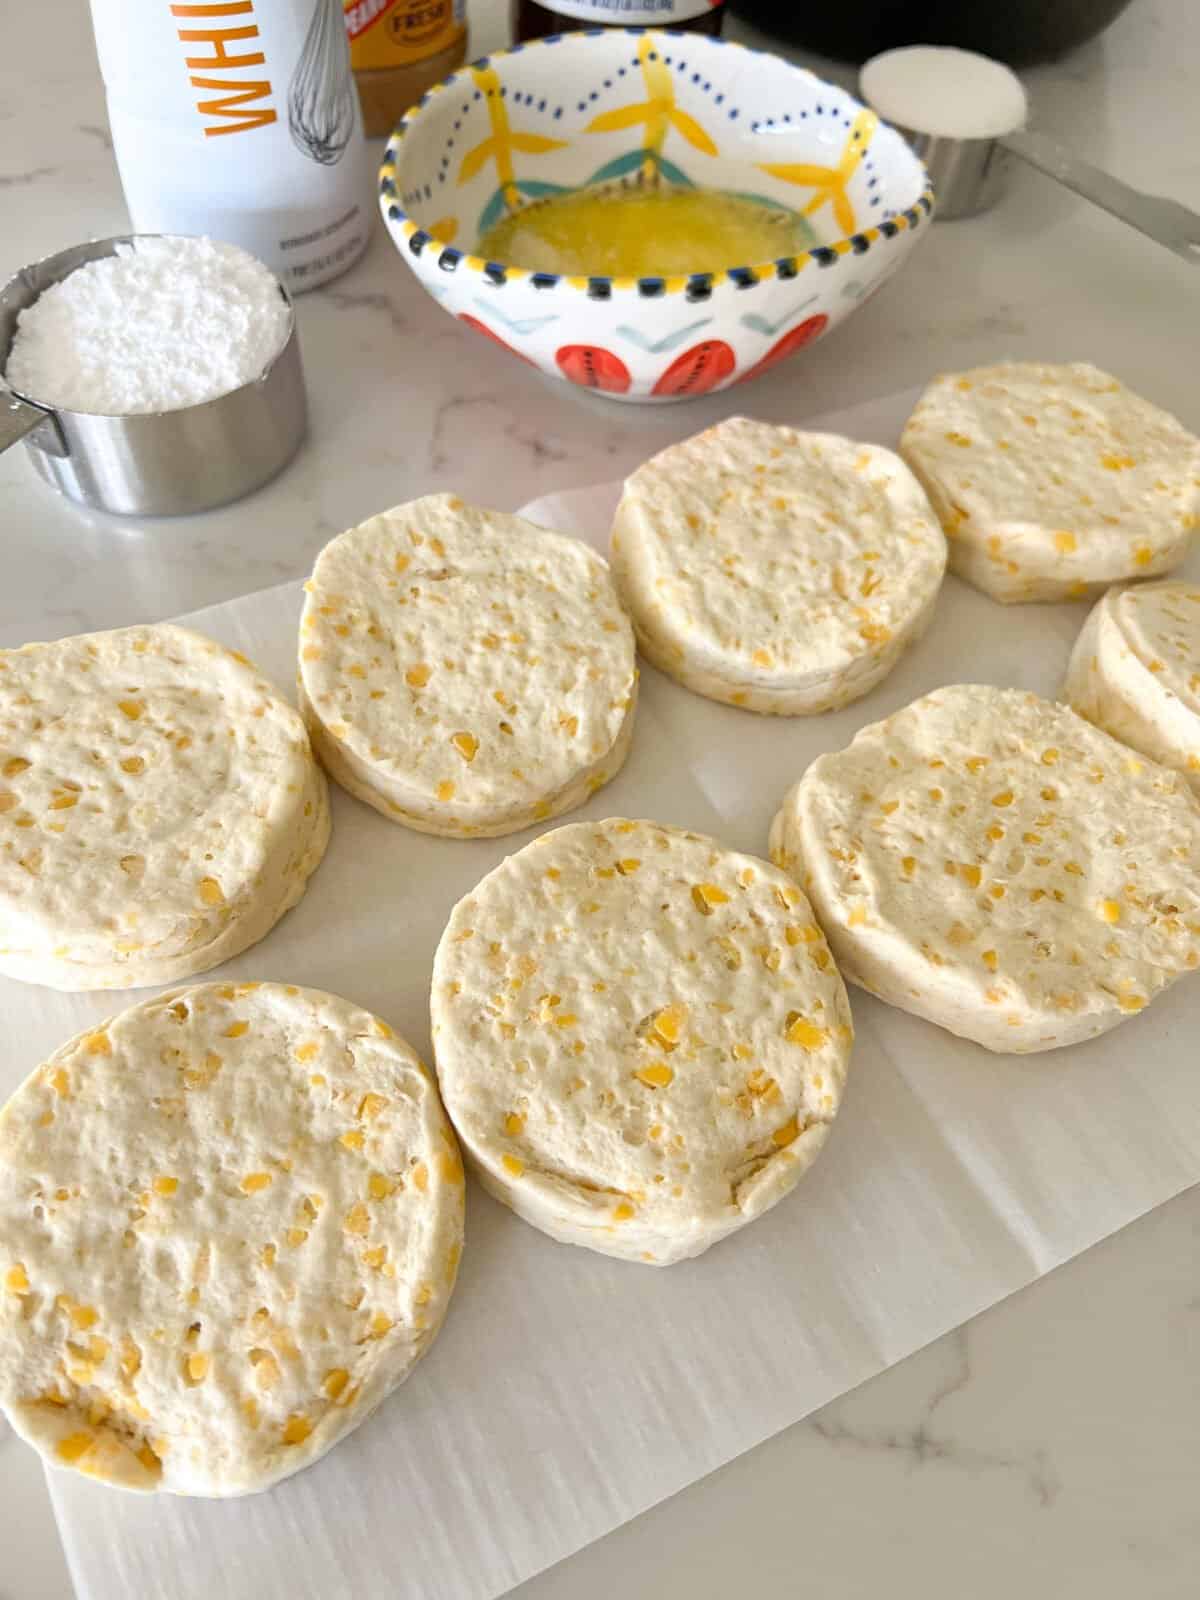 biscuits placed onto parchment paper on counter